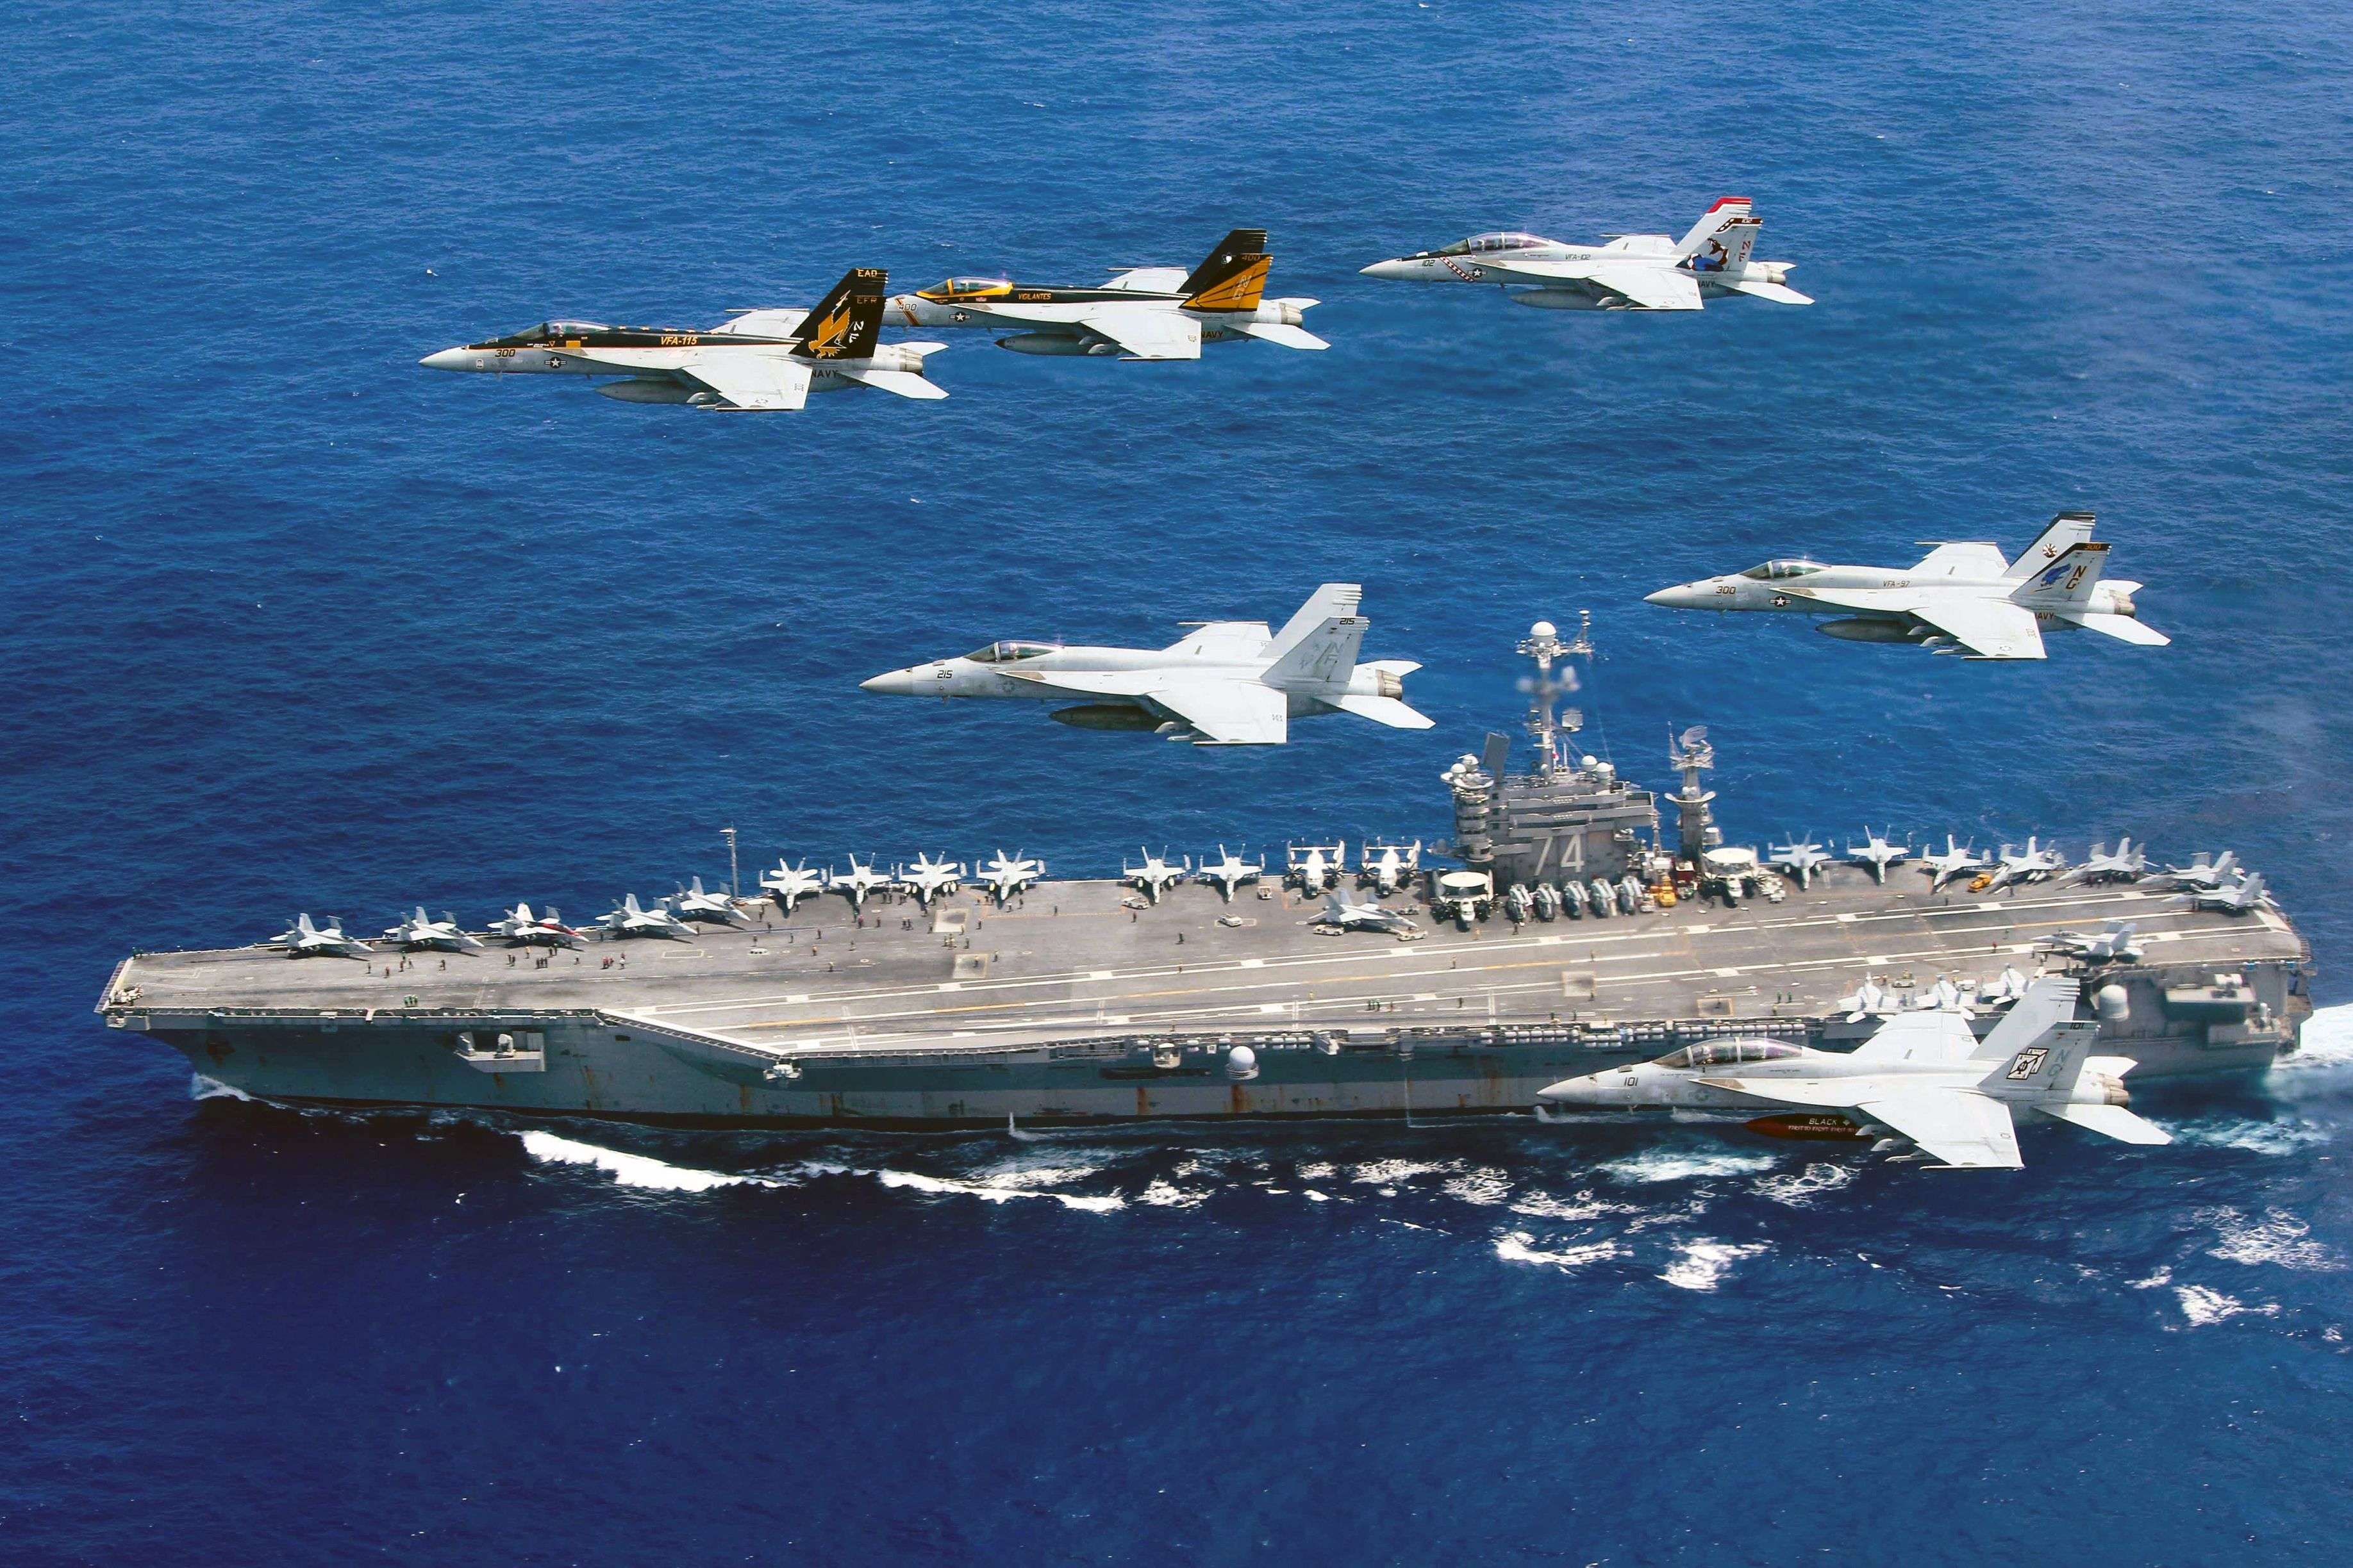 US fighter planes fly above the Nimitz-class aircraft carrier USS John C. Stennis in the Philippine Sea. Two US aircraft carriers have started exercises in the area, defence officials said on June 19, as Washington's ally Manila faces growing pressure from Beijing in the South China Sea. Photo: AFP